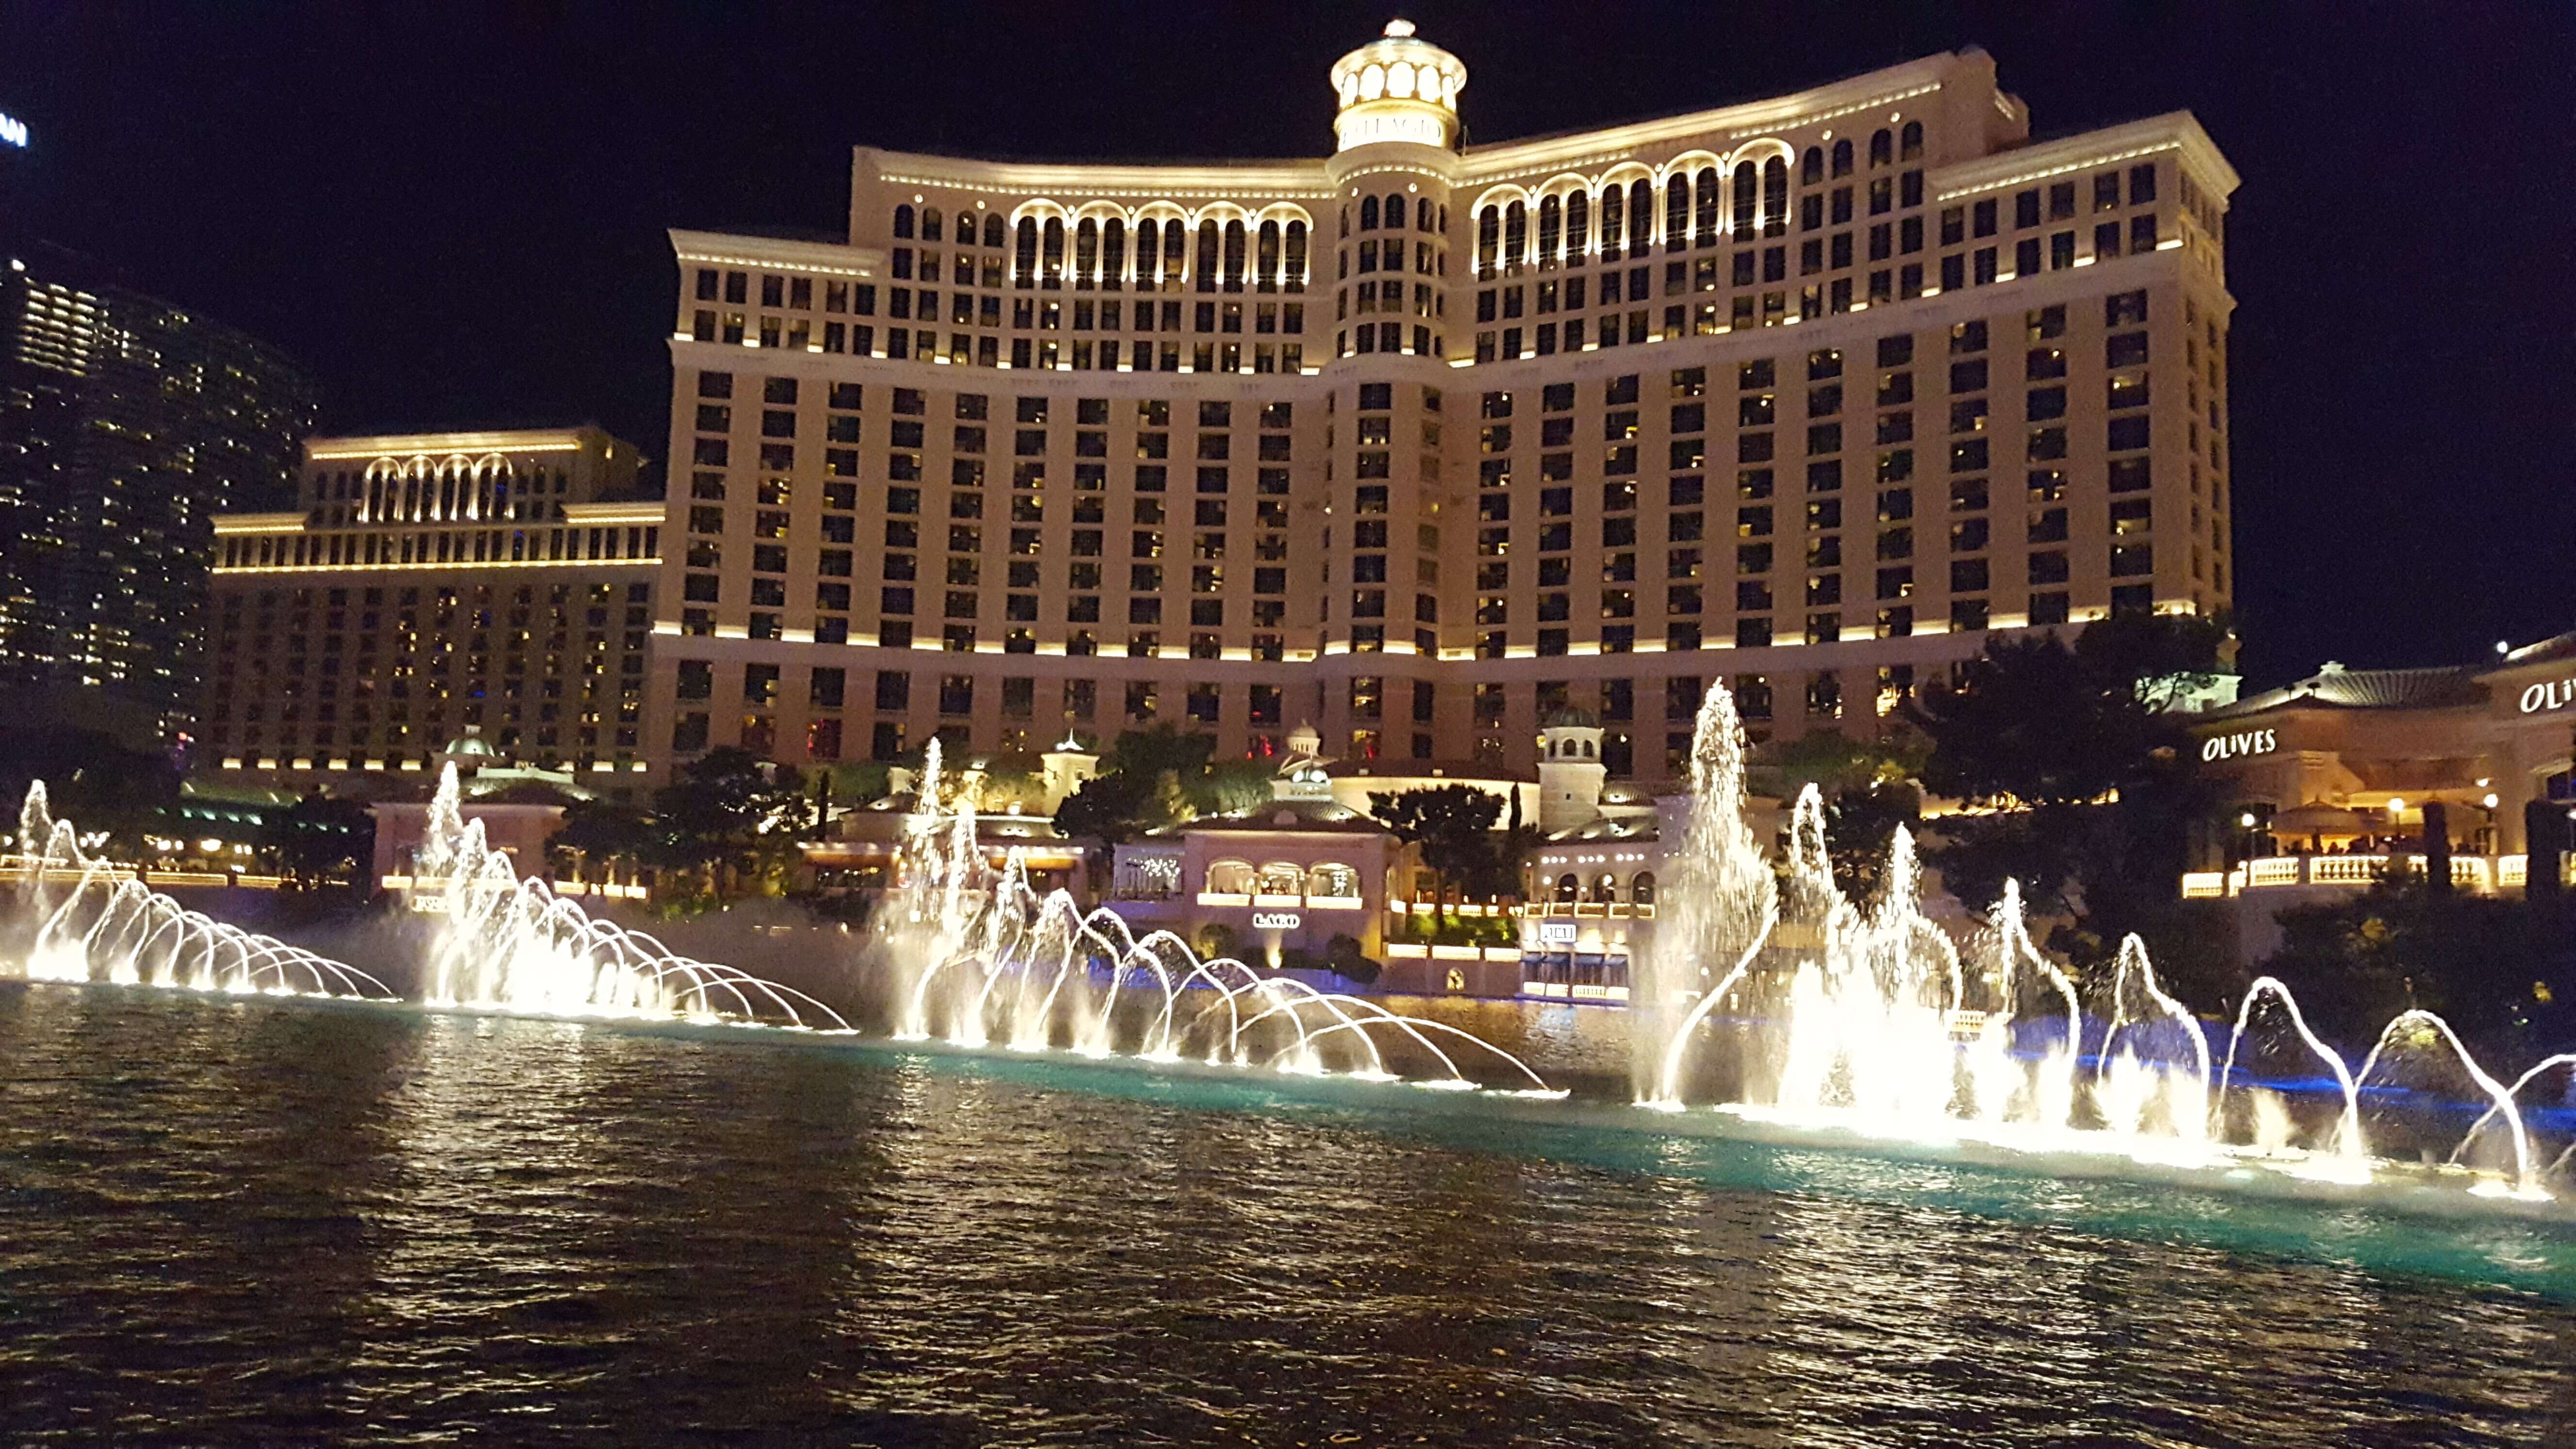 The Water Show at Bellagio, Las Vegas, one of the best free activities in Las Vegas